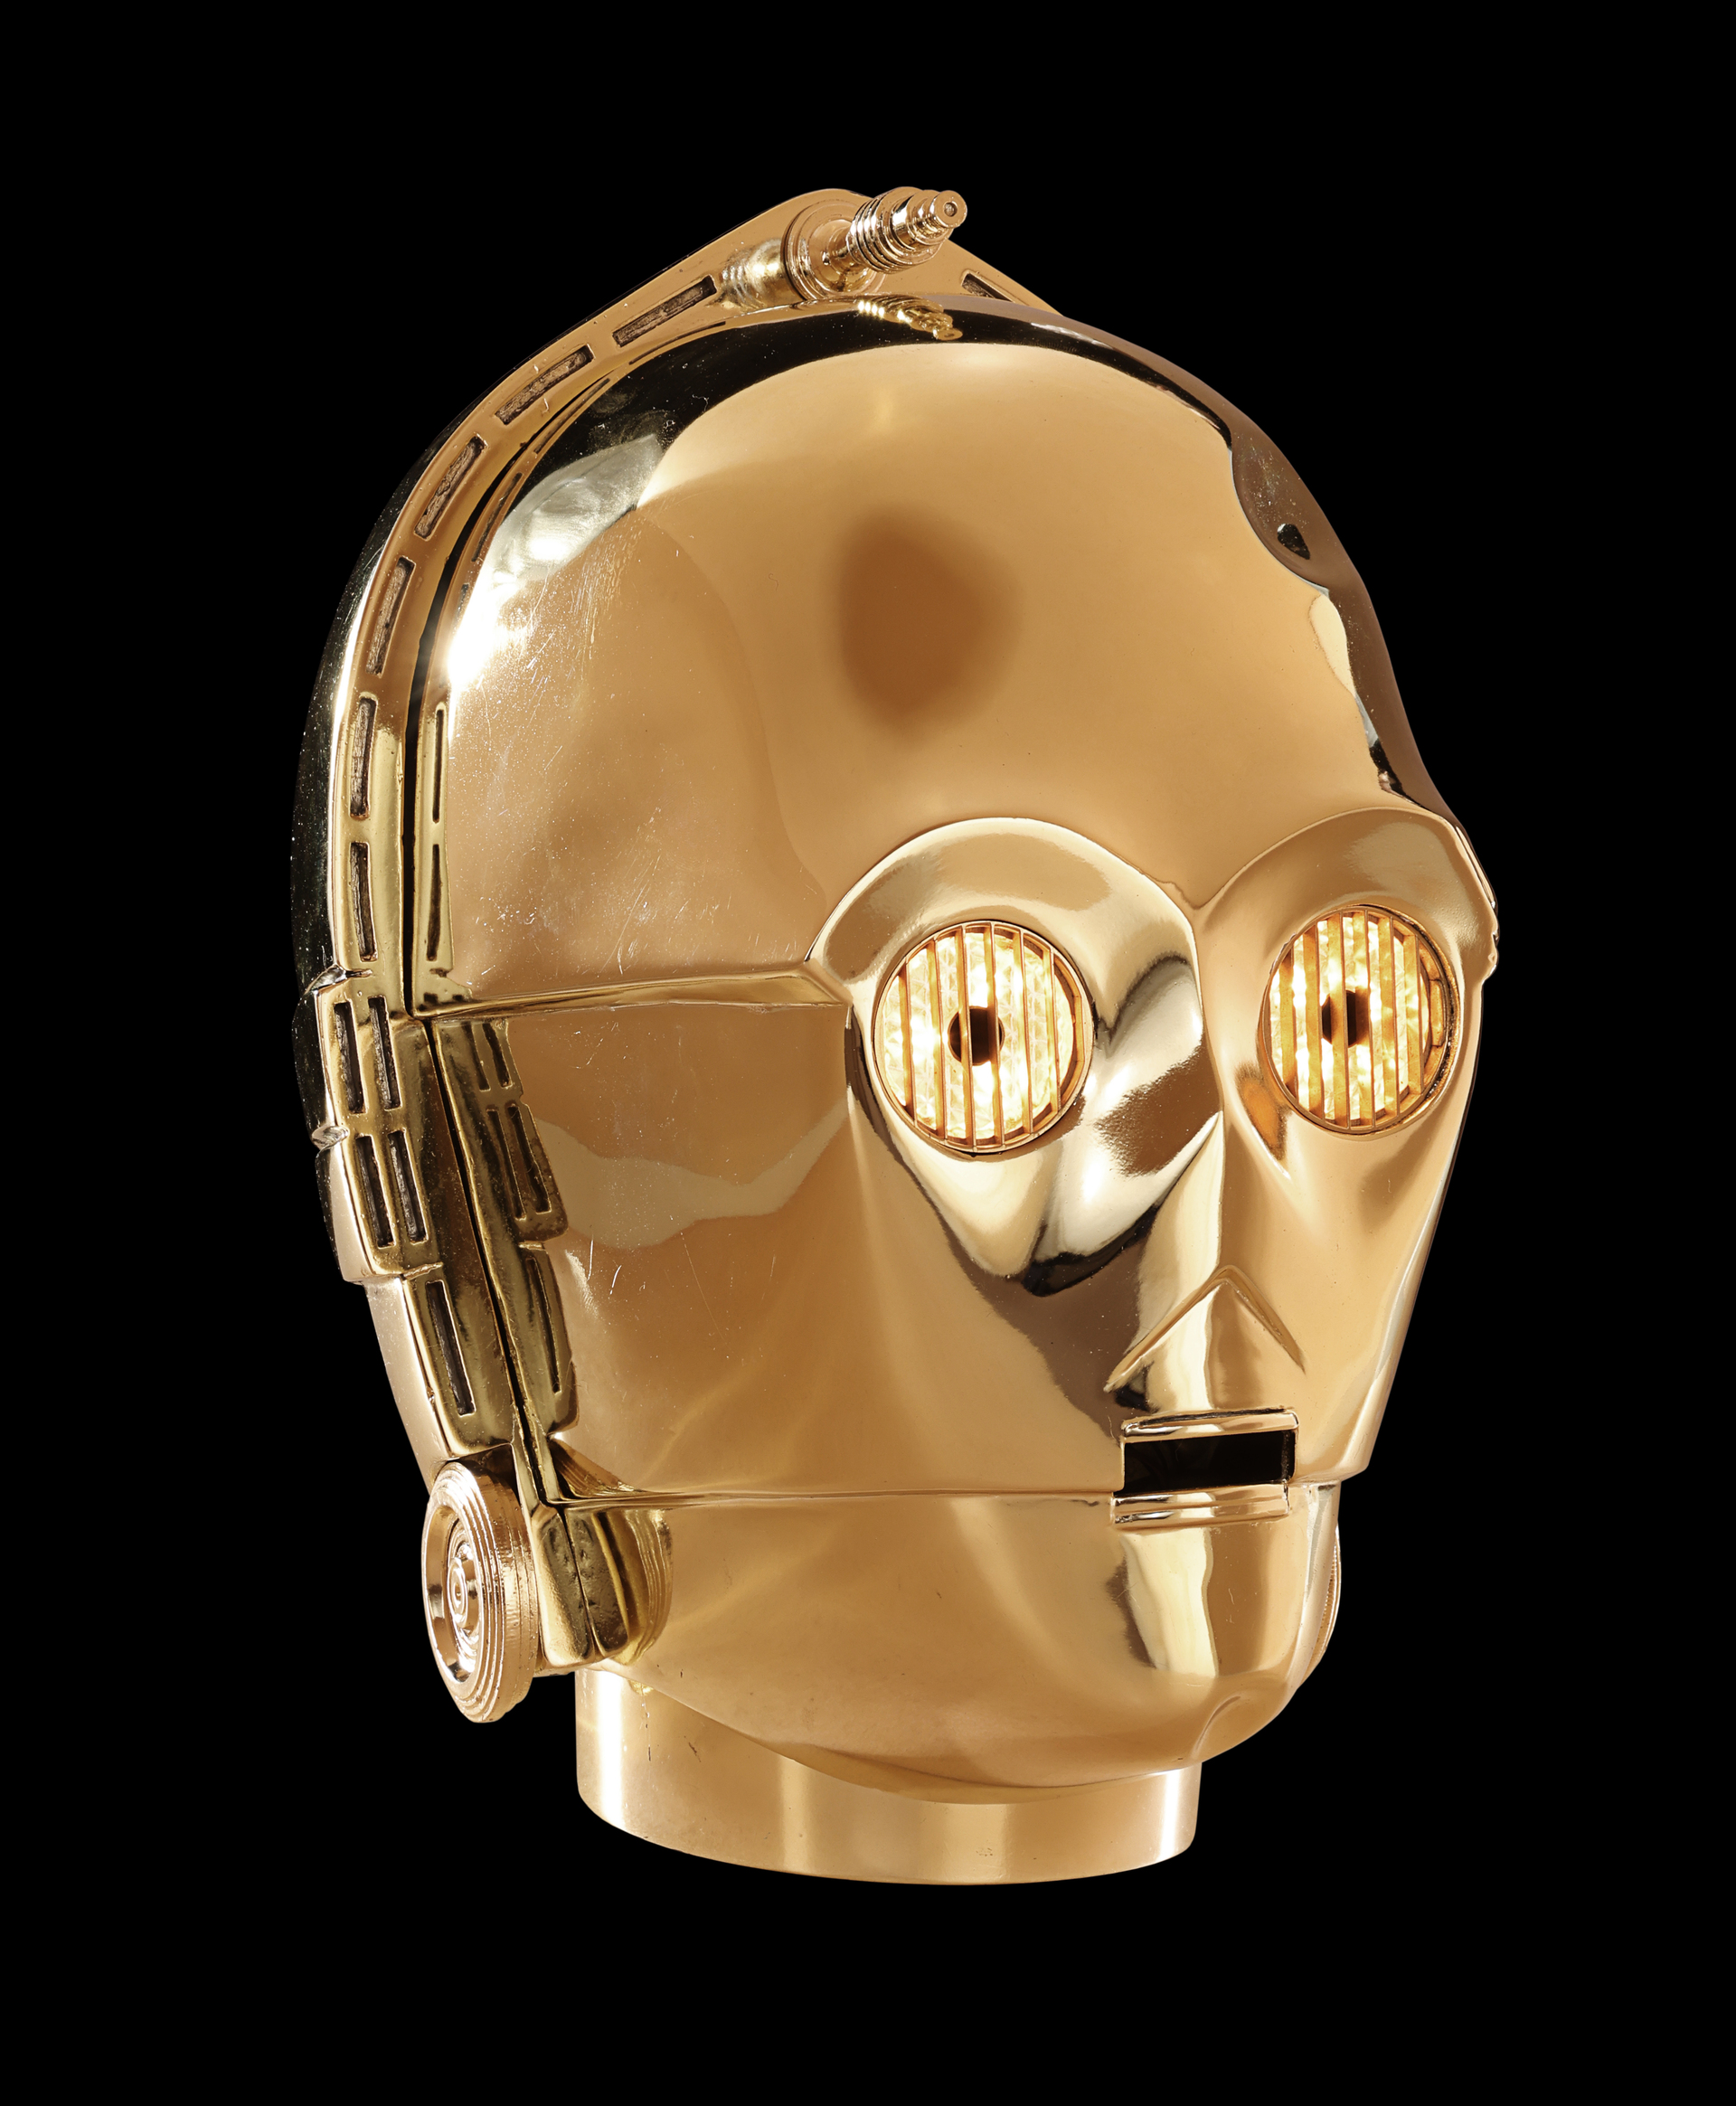 STAR WARS: A NEW HOPE (1977) - Anthony Daniels Collection: Screen-matched Light-up C-3PO (Anthony Da - Image 15 of 42